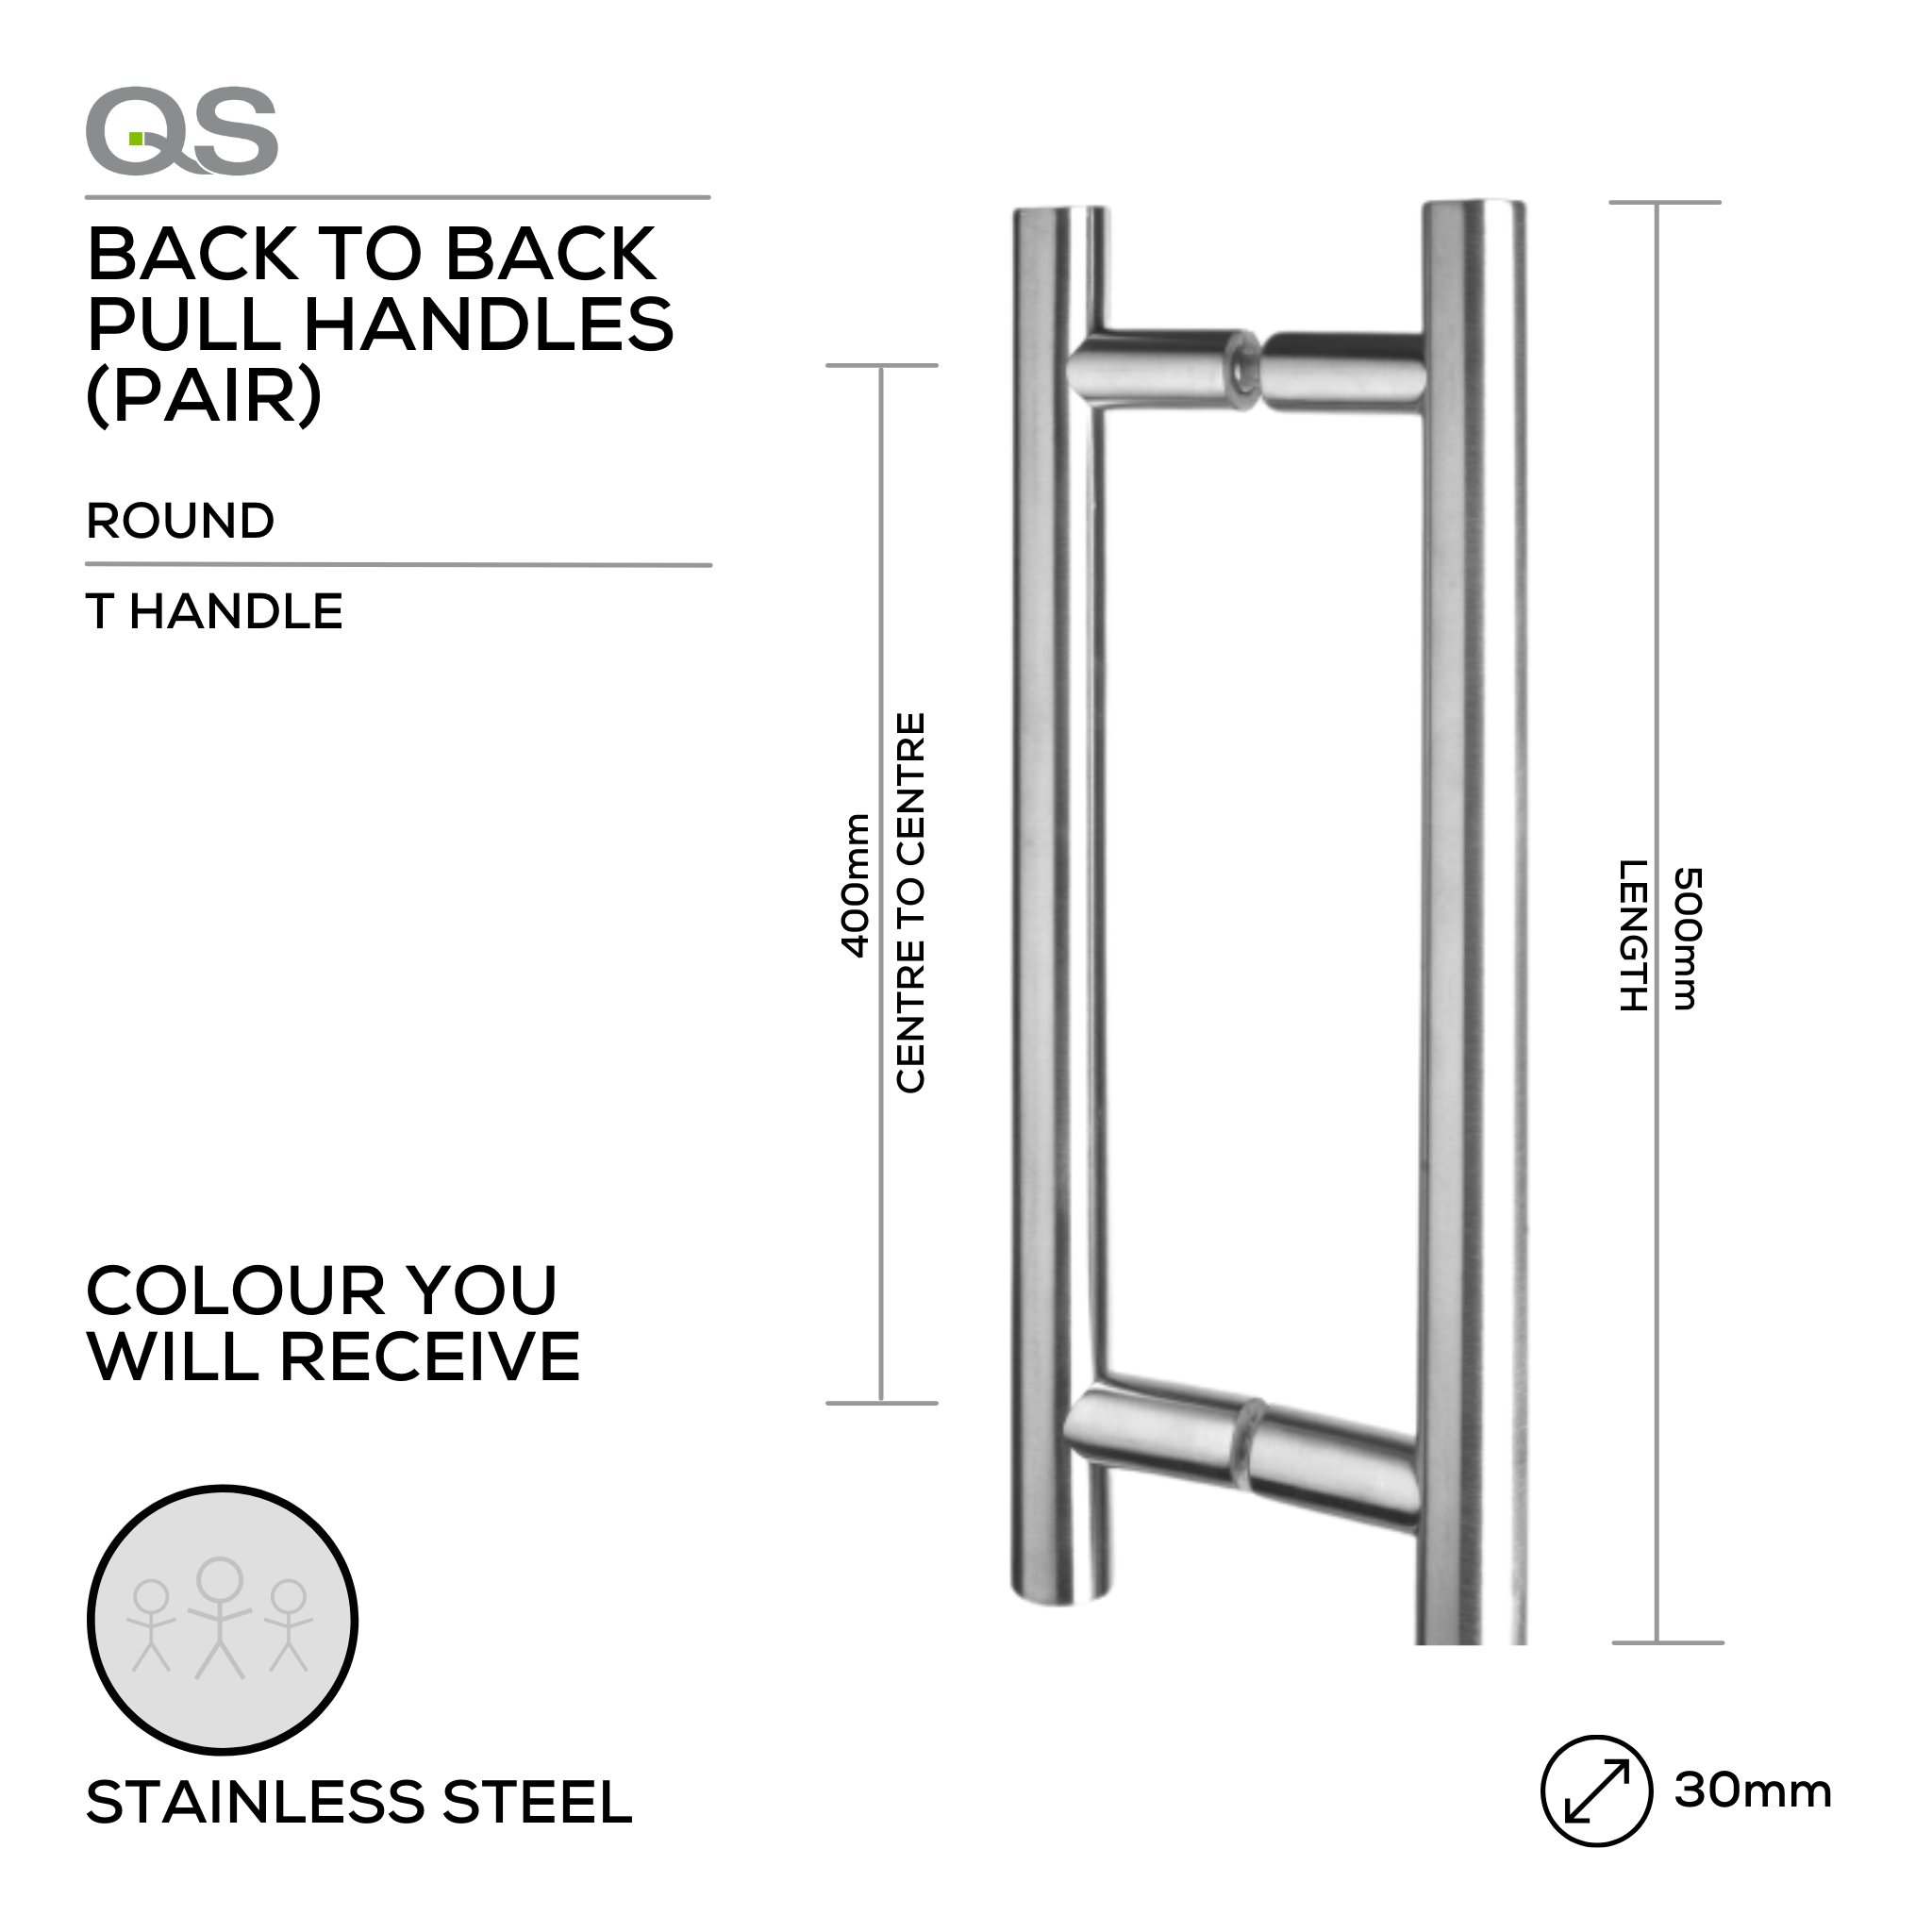 QS2501 T Handle, Pull Handle, Round, T Handle, BTB, 30mm (Ø) x 500mm (l) x 400mm (ctc), Stainless Steel, QS